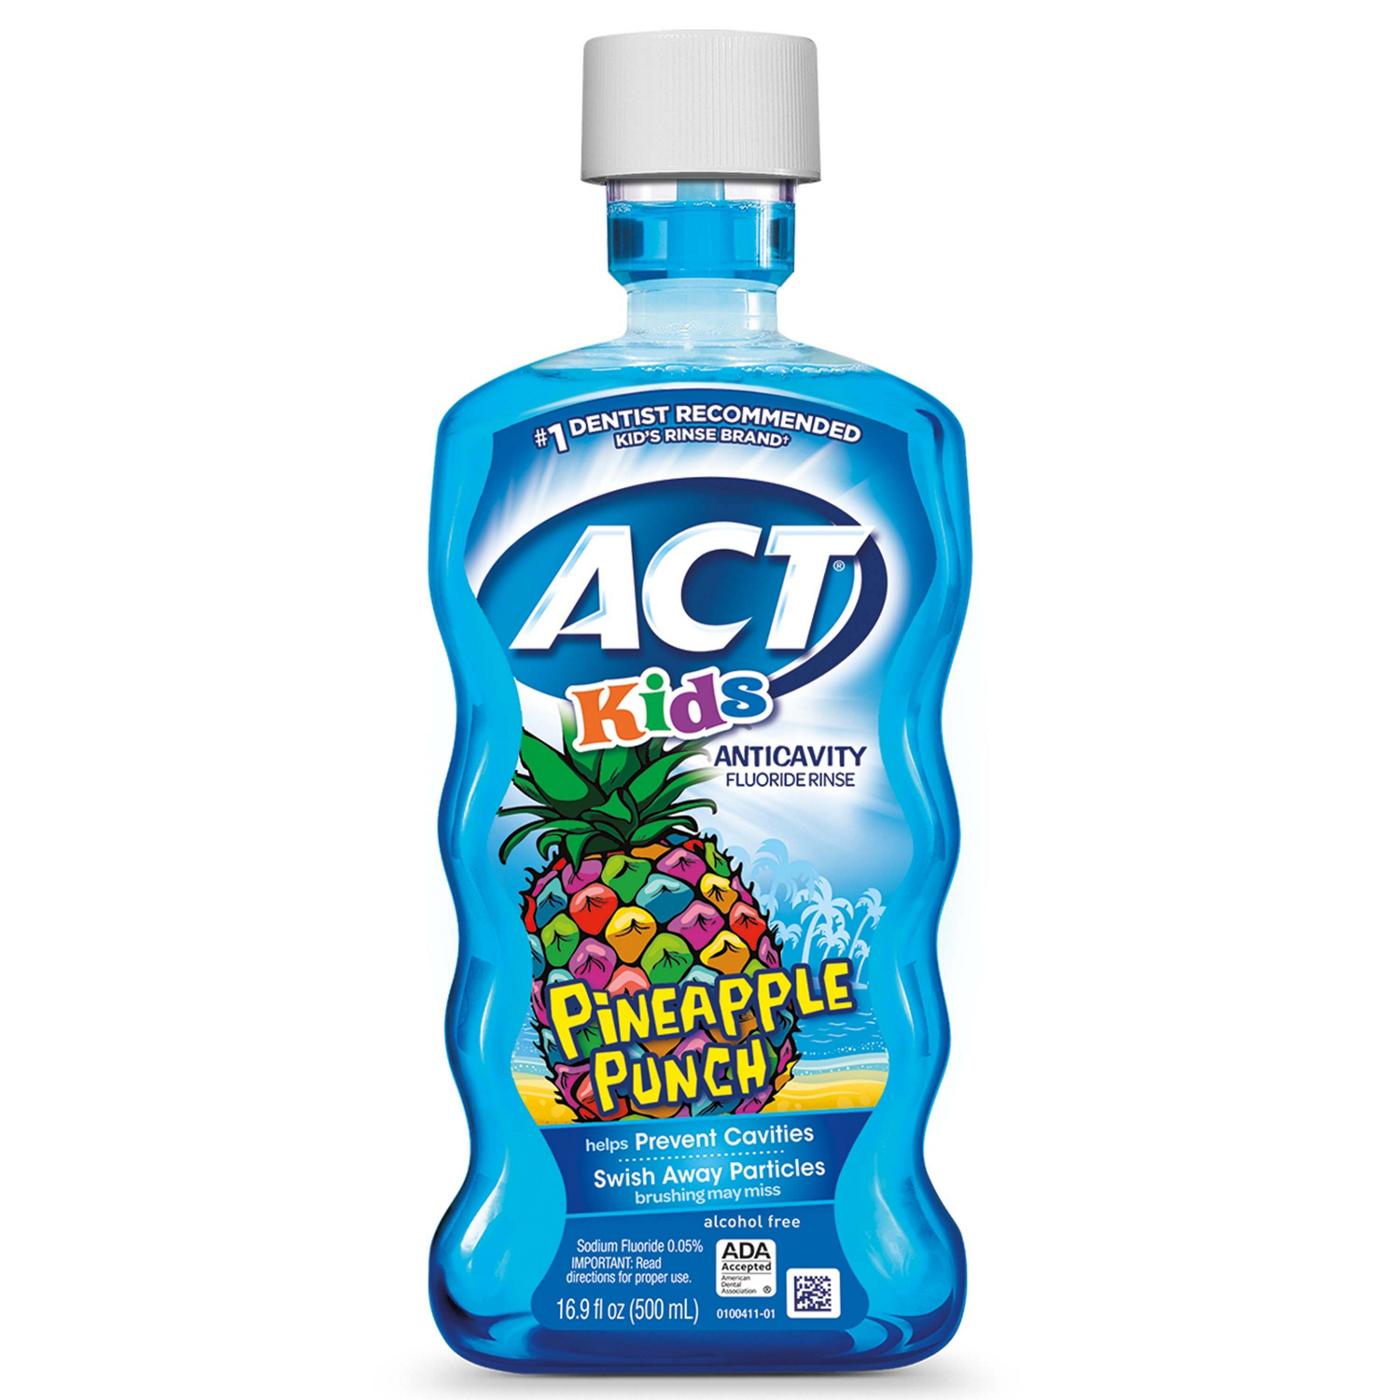 ACT Kids Anticavity Fluoride Rinse - Pineapple Punch; image 1 of 6